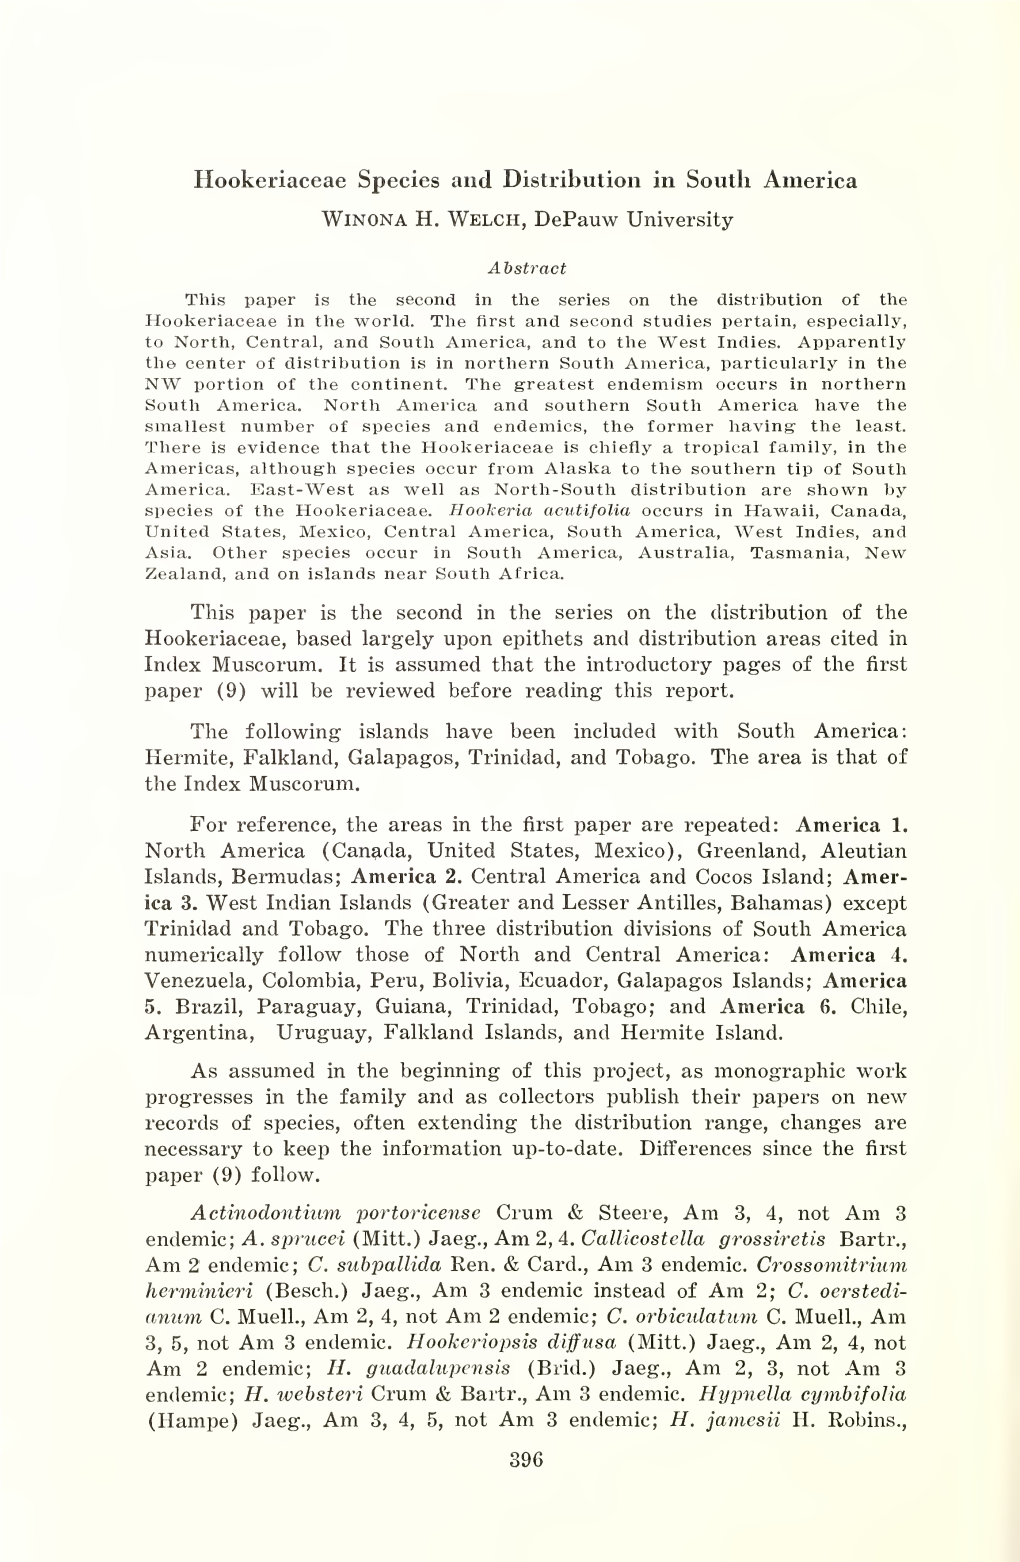 Proceedings of the Indiana Academy of Science